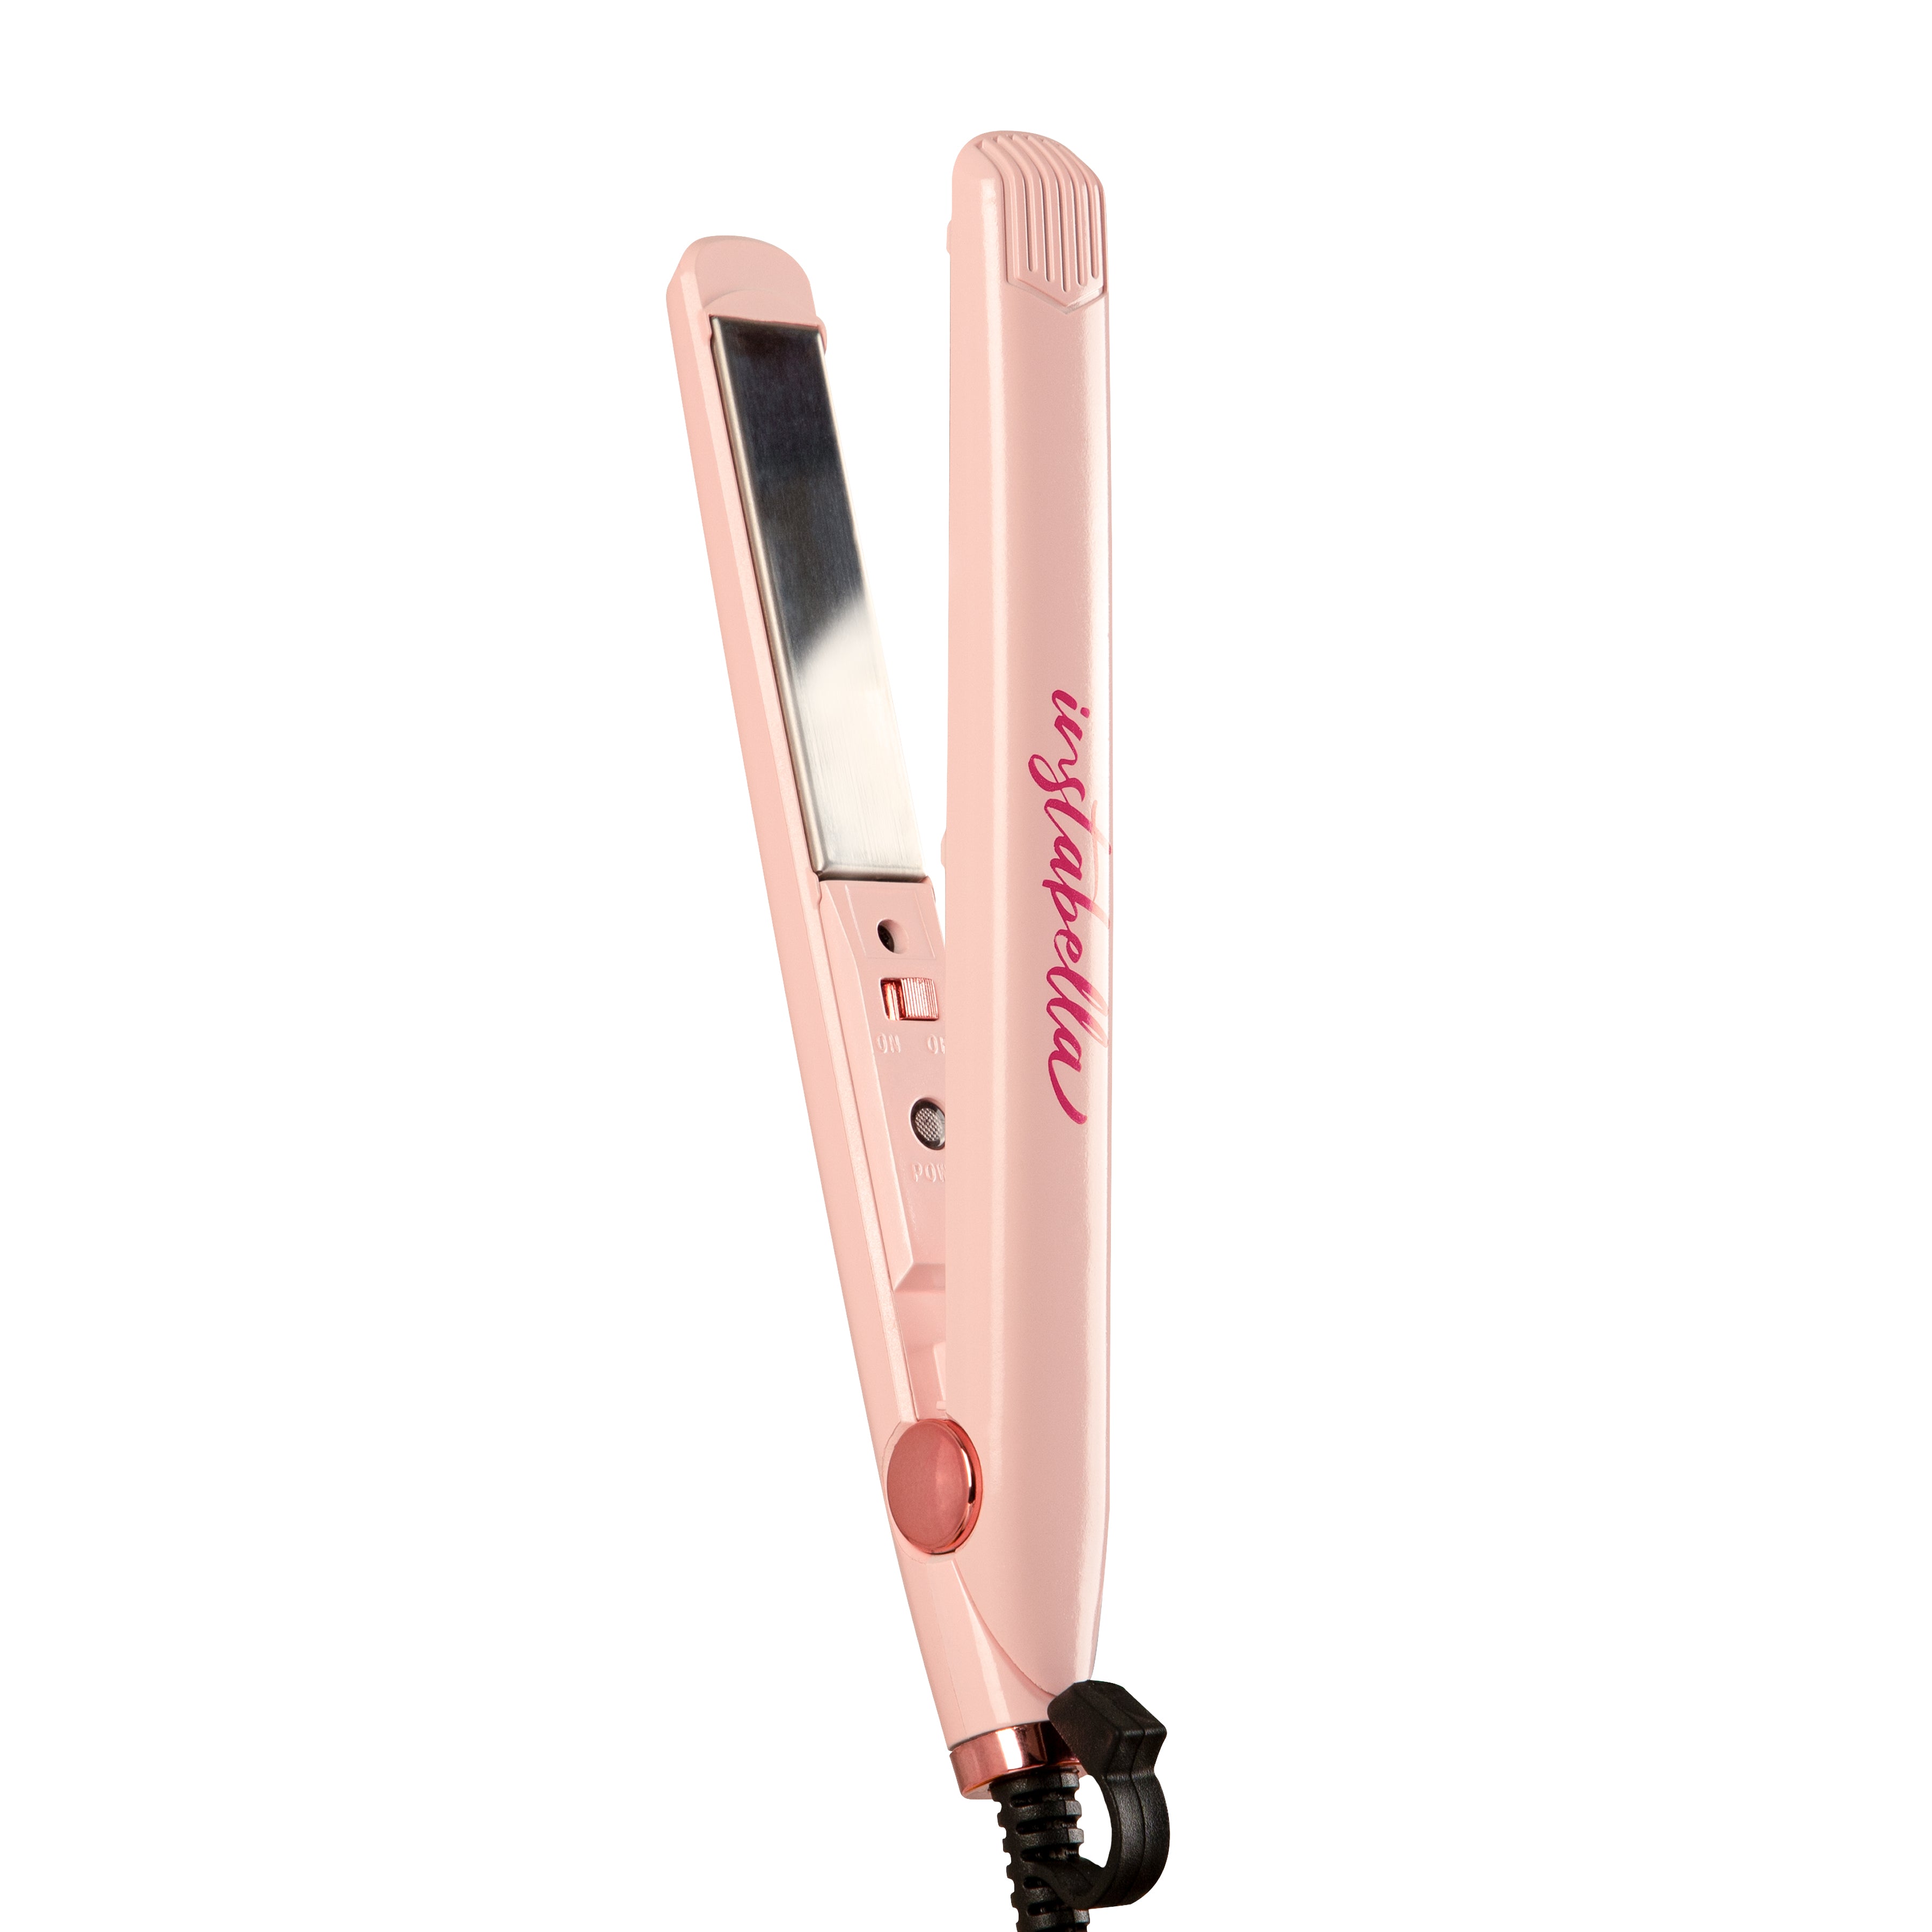 INSTABELLA Glamourosa 2 in 1 Compact Straightener & Curler HS-340